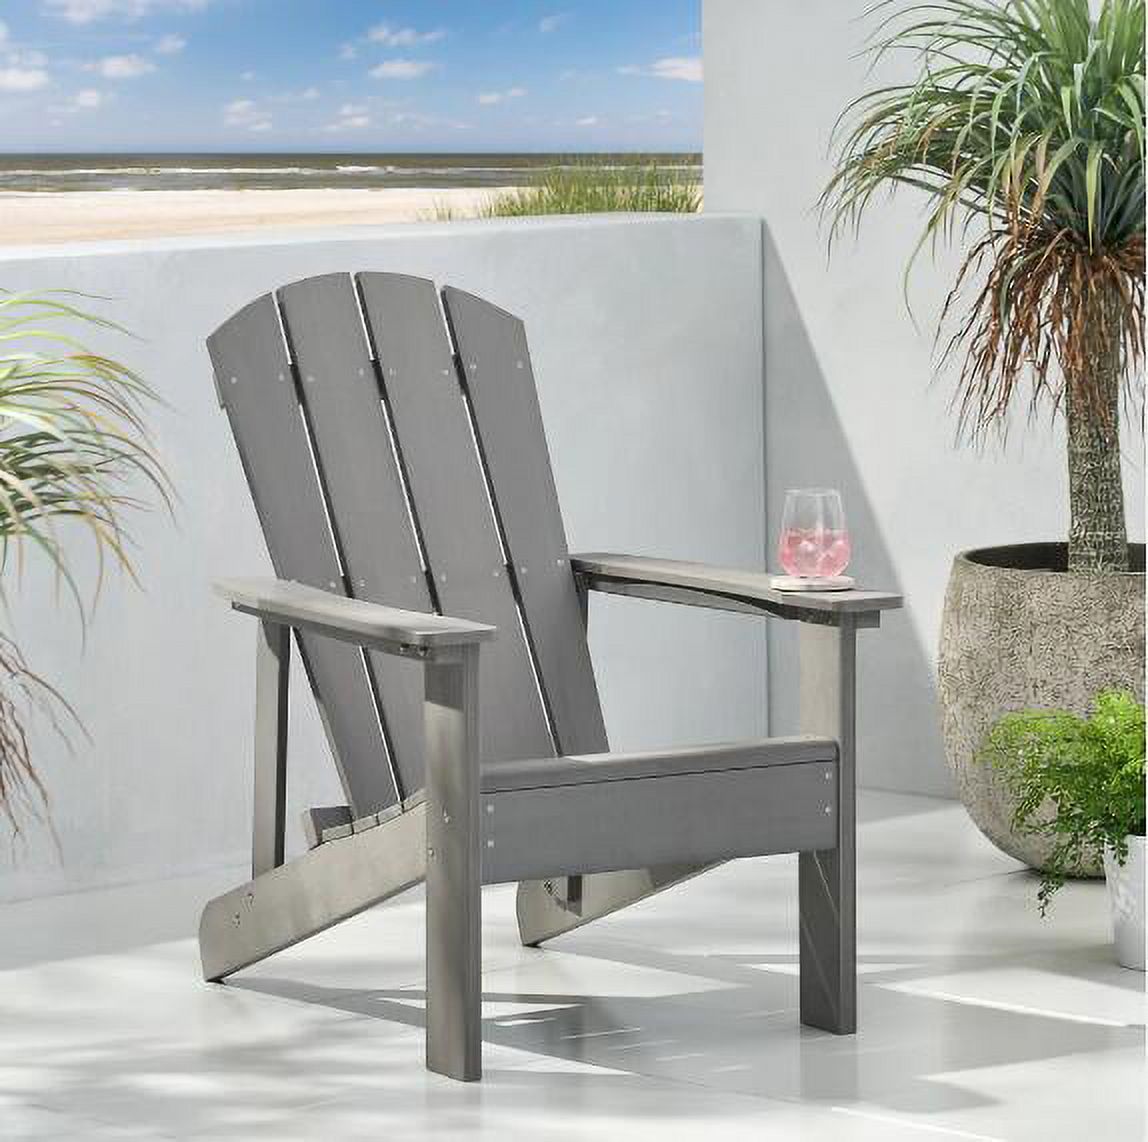 Classic Solid Gray Outdoor Solid Wood Adirondack Chair Garden Lounge Chair - image 1 of 9